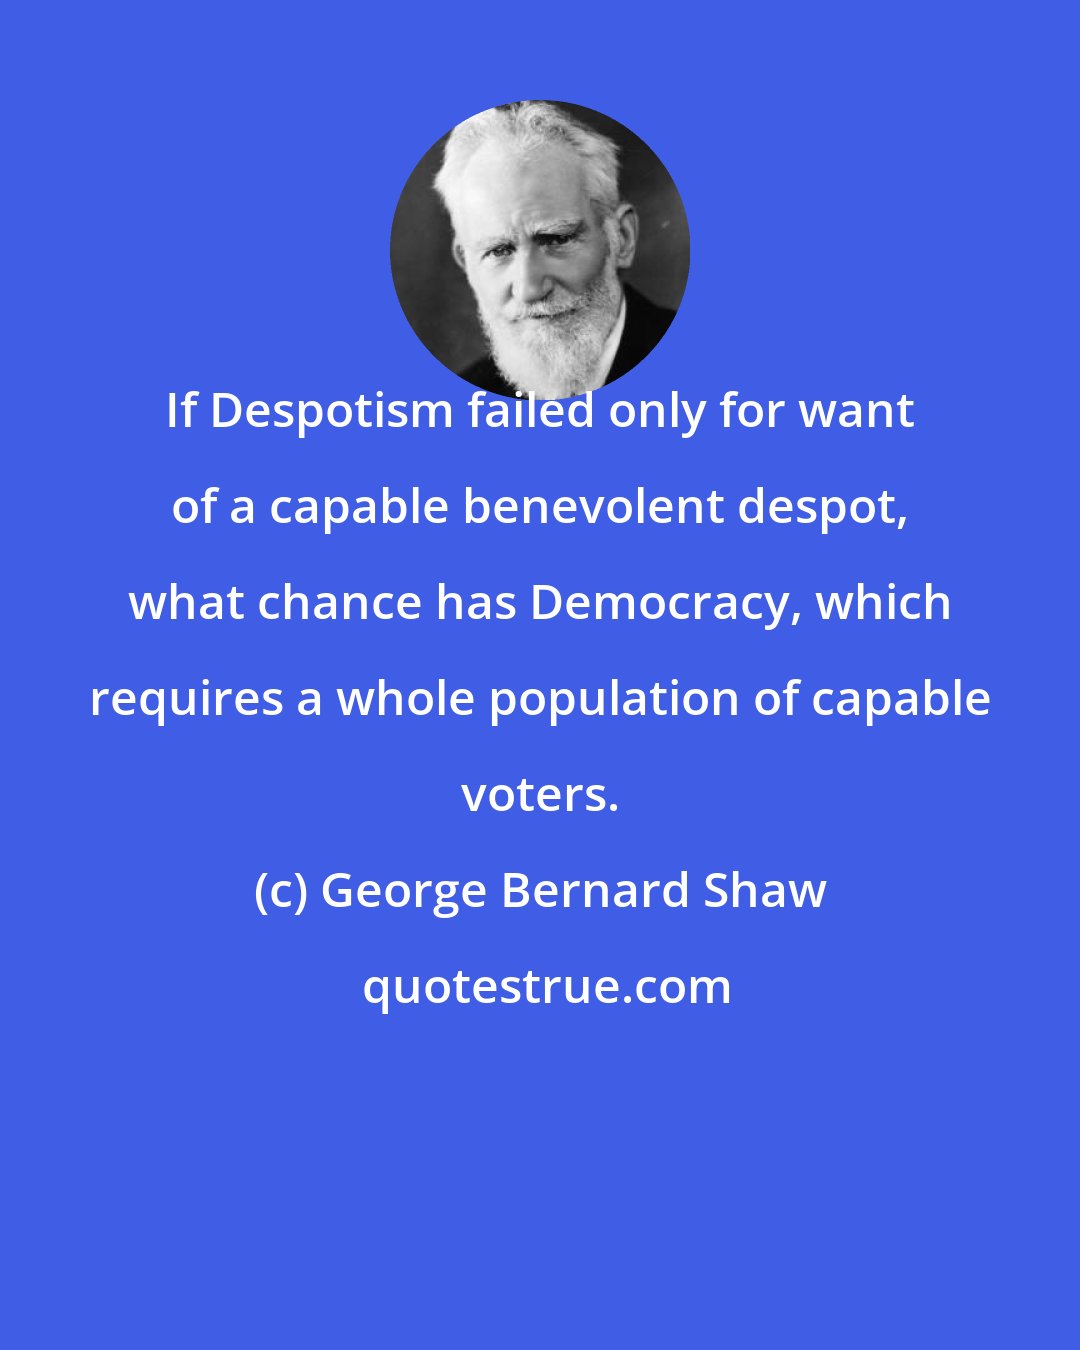 George Bernard Shaw: If Despotism failed only for want of a capable benevolent despot, what chance has Democracy, which requires a whole population of capable voters.